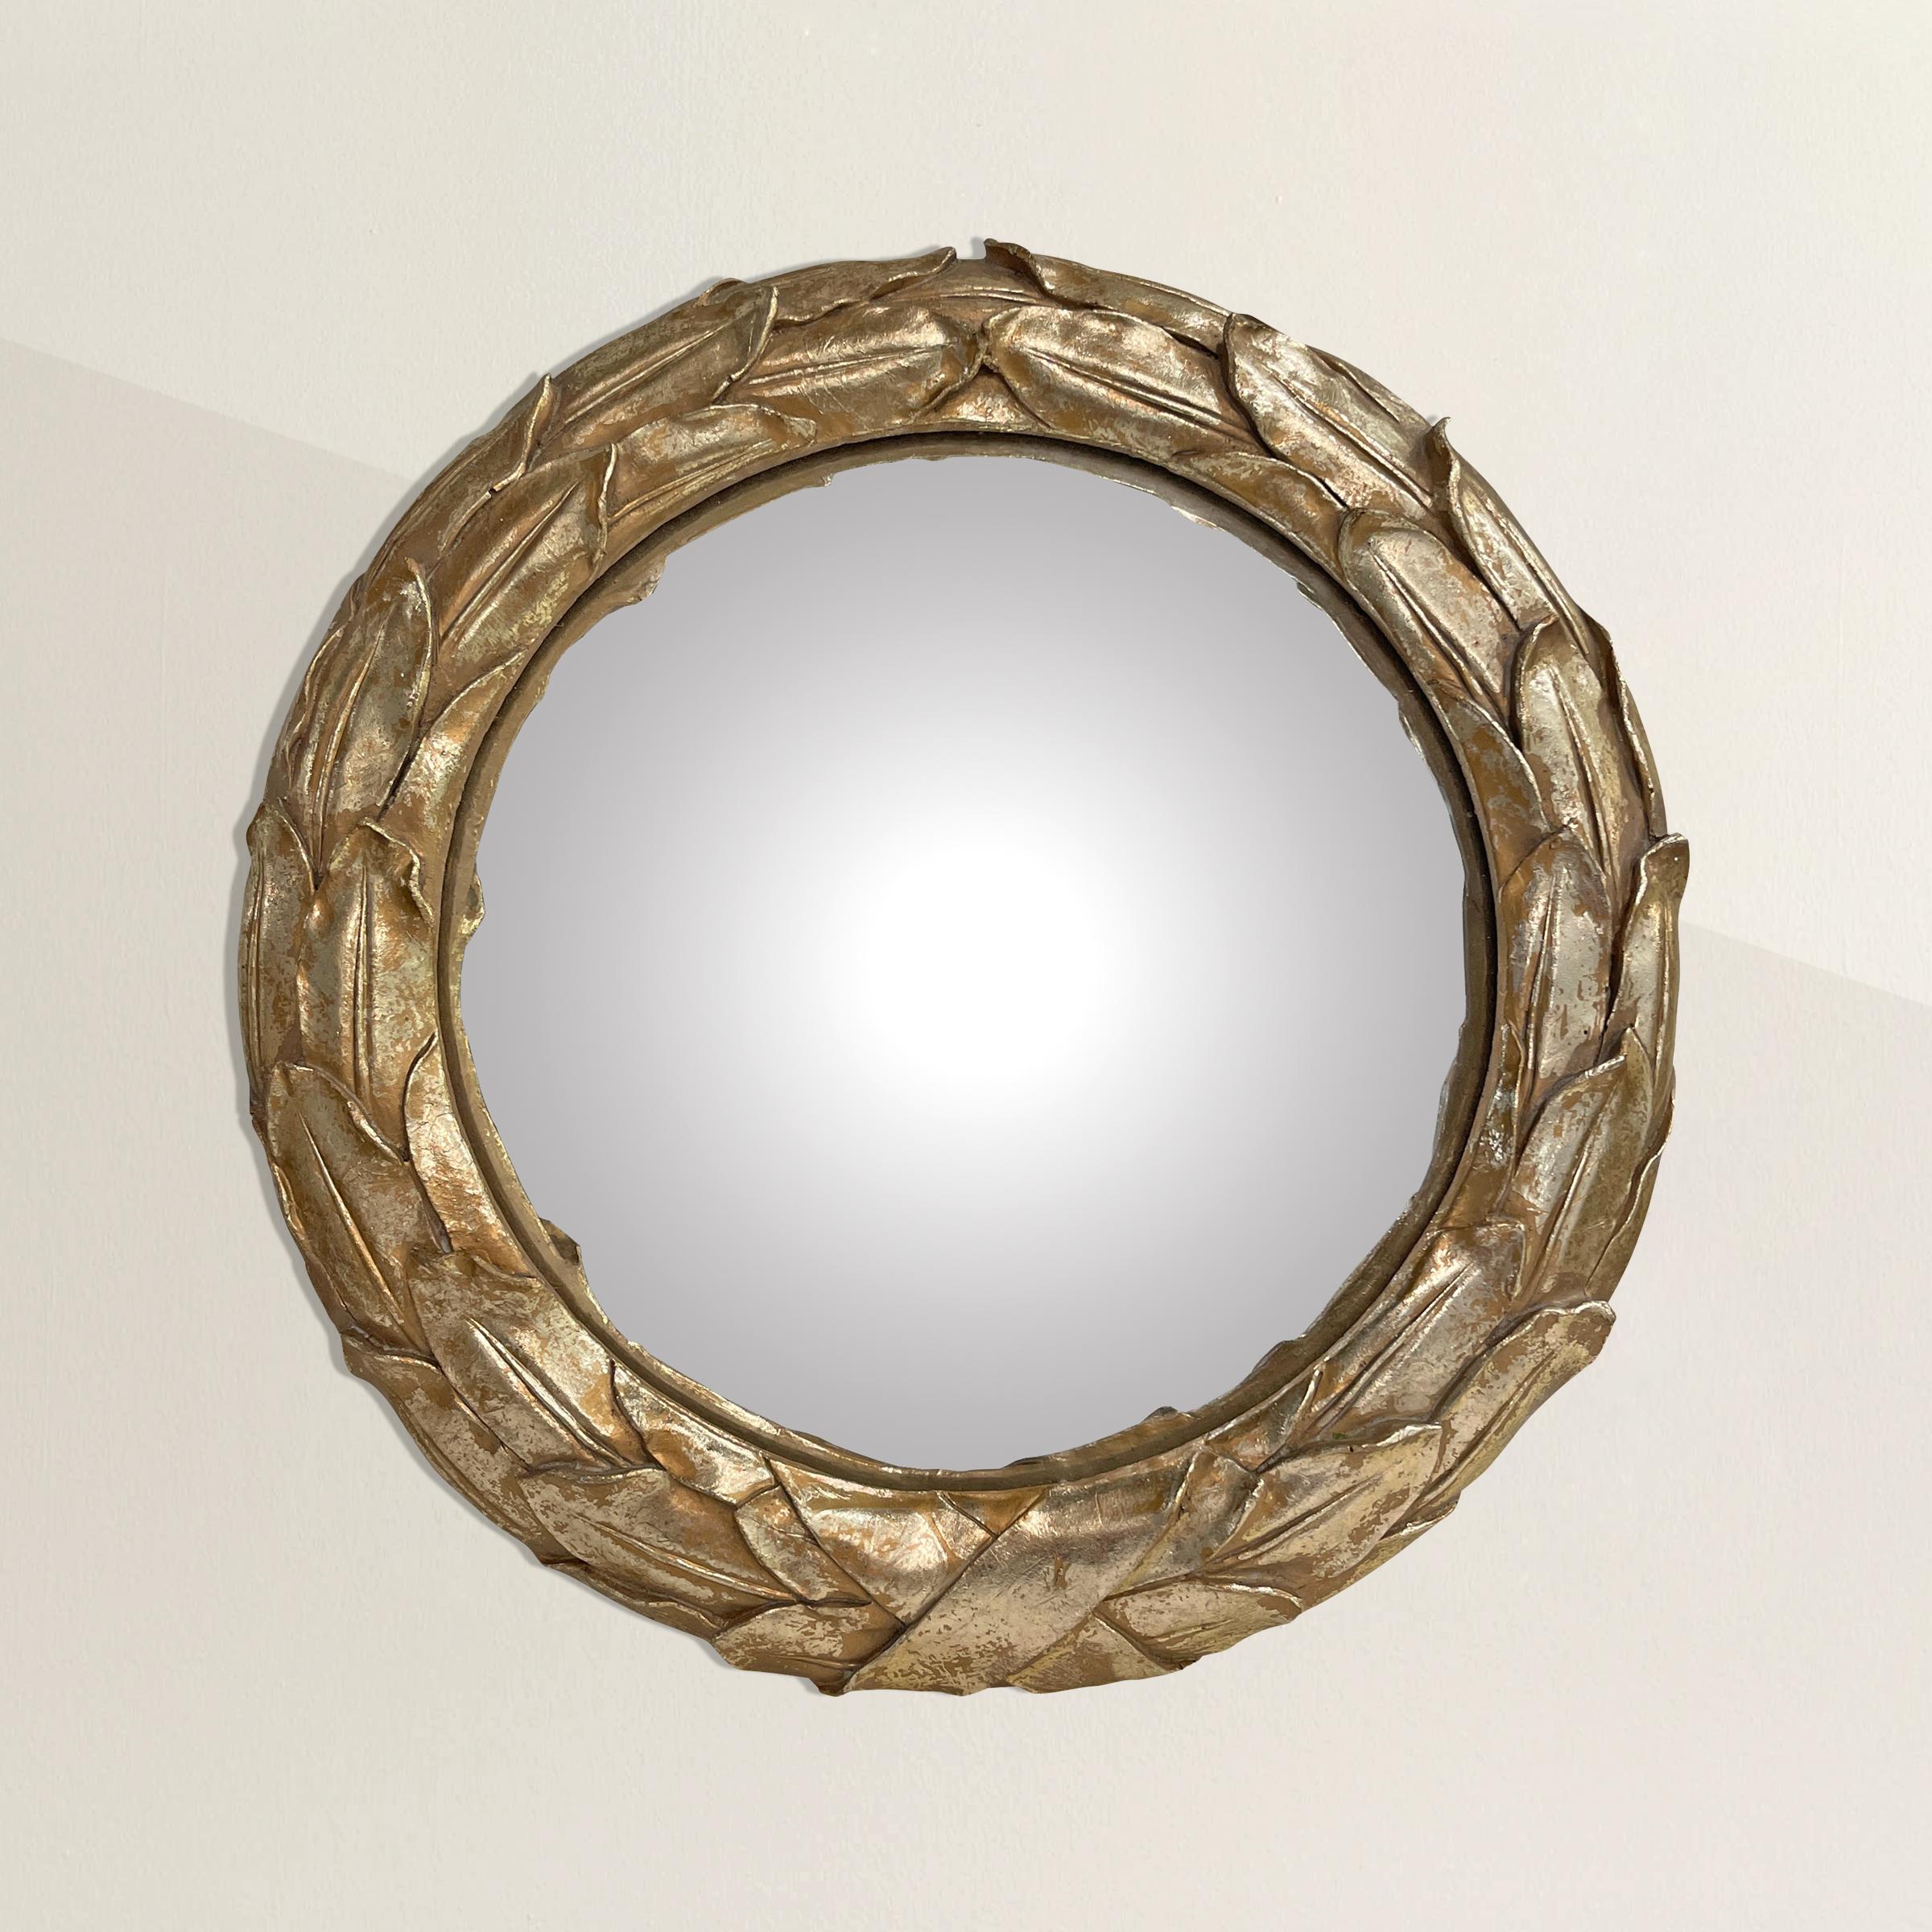 A bold neoclassical-inspired convex mirror with a laurel leaf and ribbon design, and a shimmery silver-leaf finish. The perfect mirror for a small powder room, bedroom, and just to add a little sparkle to any nook in your home.